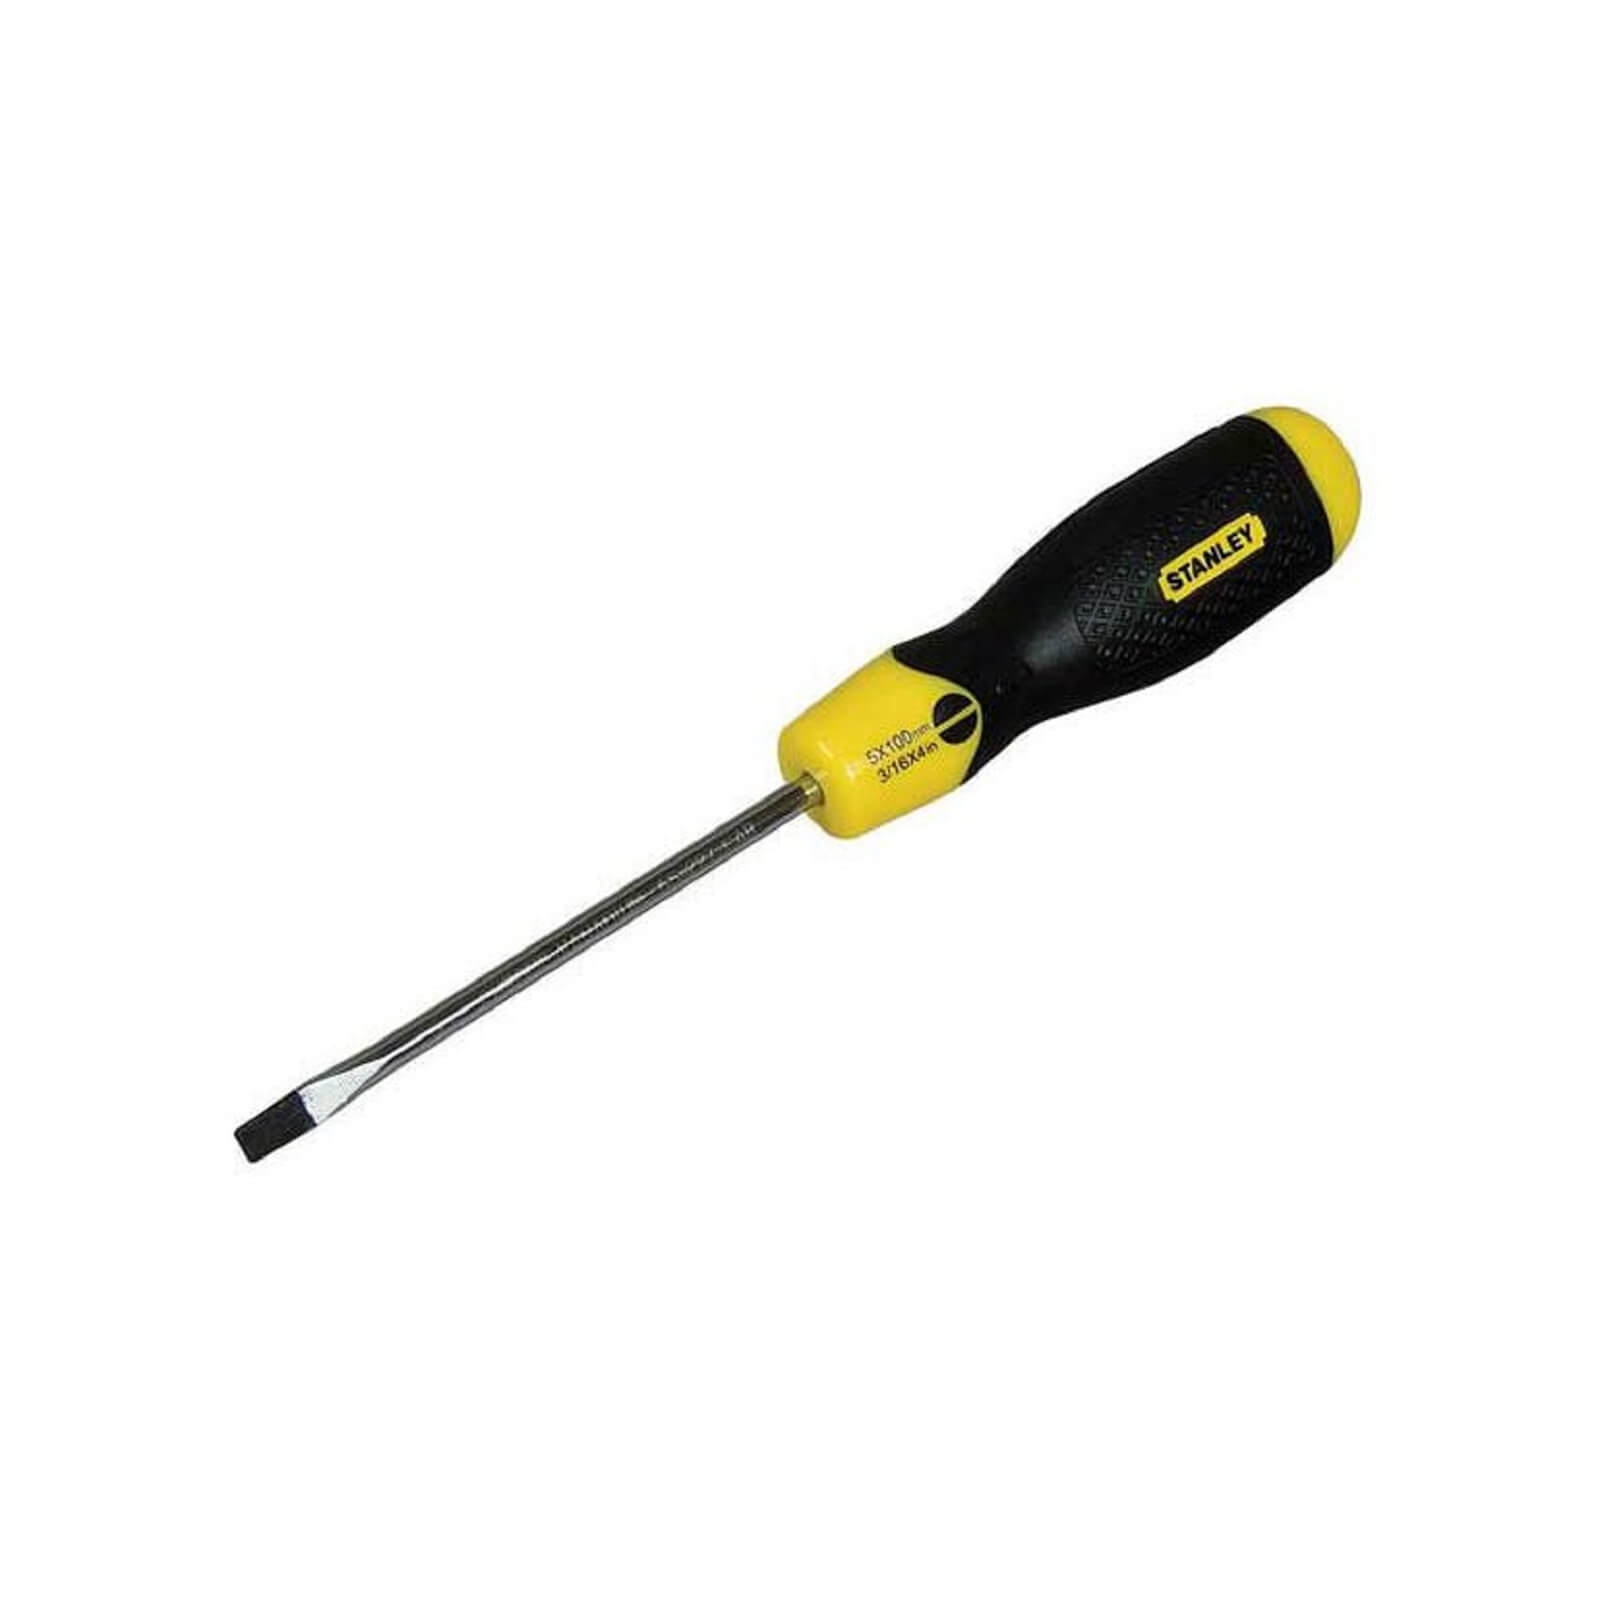 Photo of Stanley Cushion Grip Flared Screwdriver - 6.5x150mm